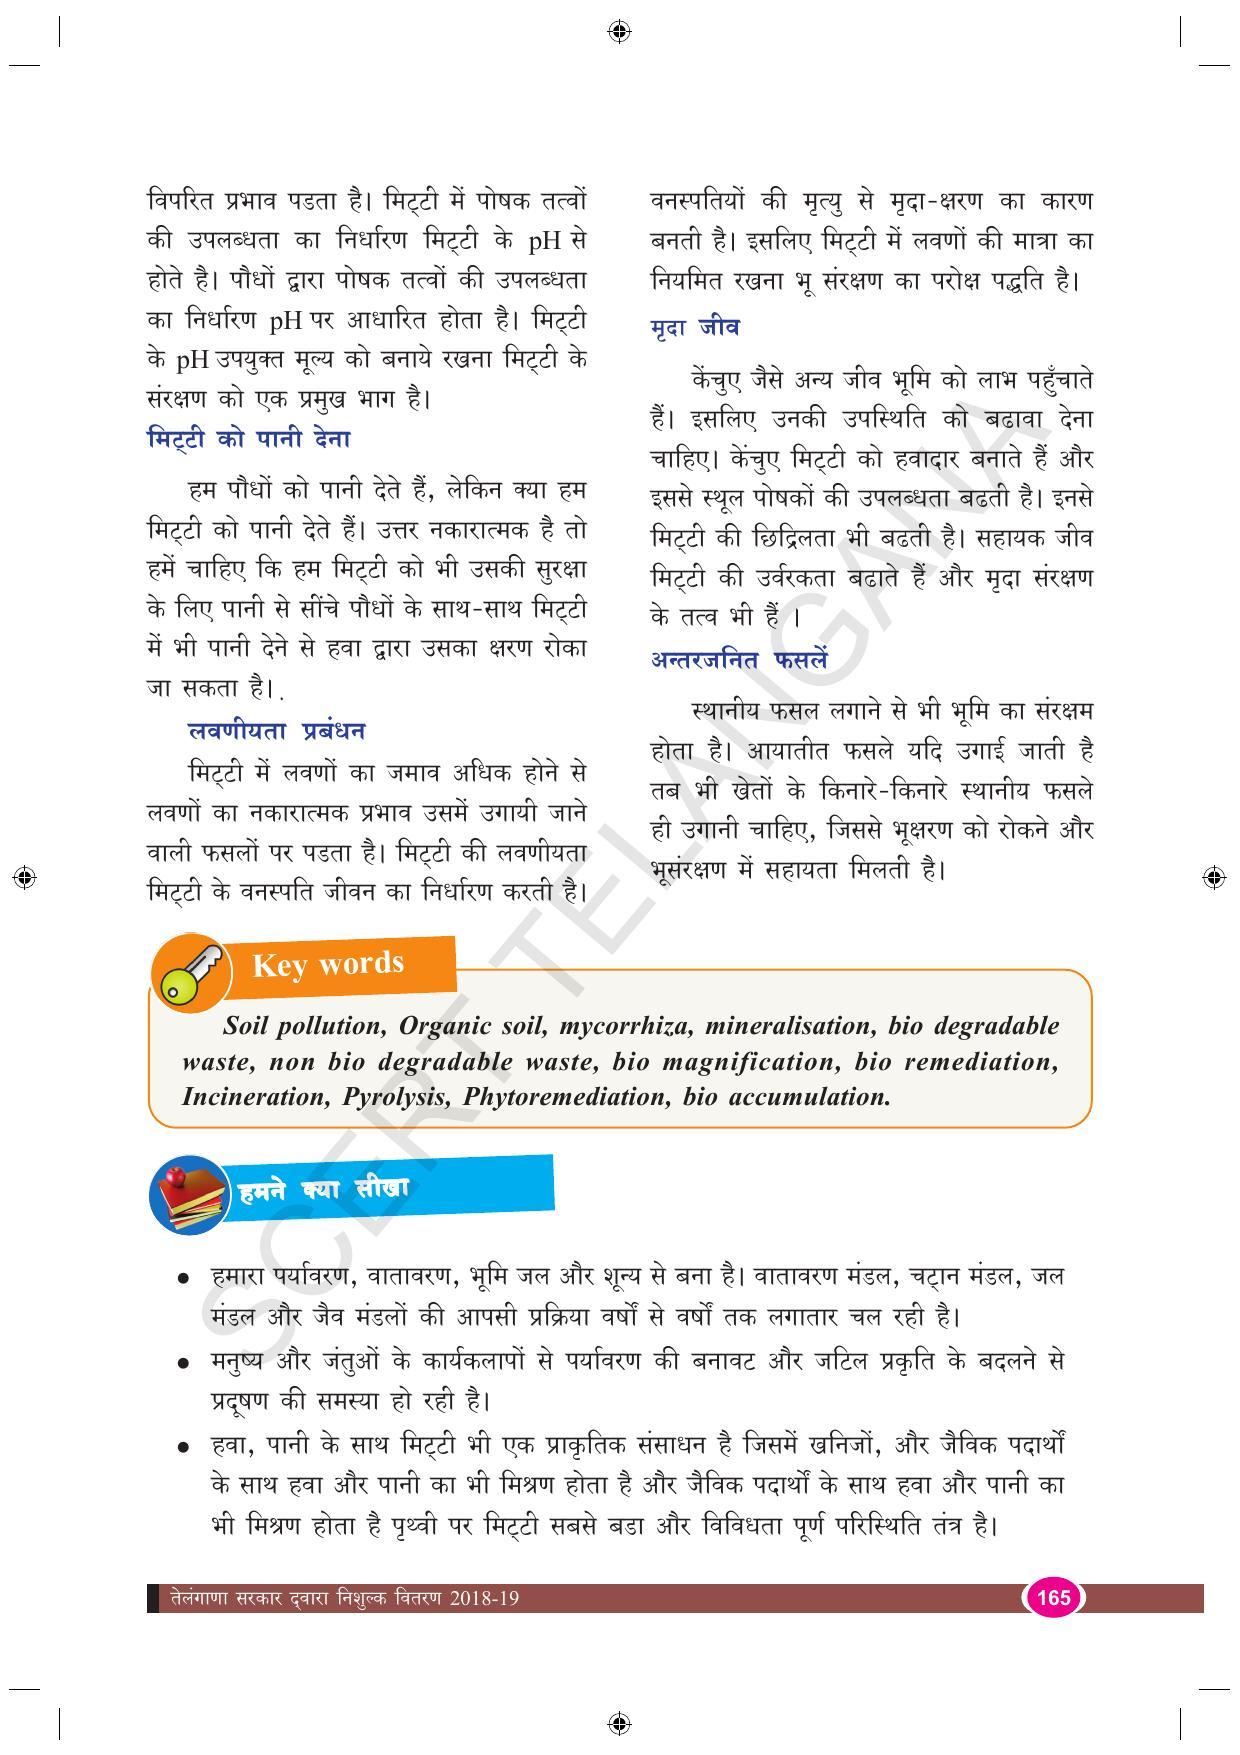 TS SCERT Class 9 Biological Science (Hindi Medium) Text Book - Page 177